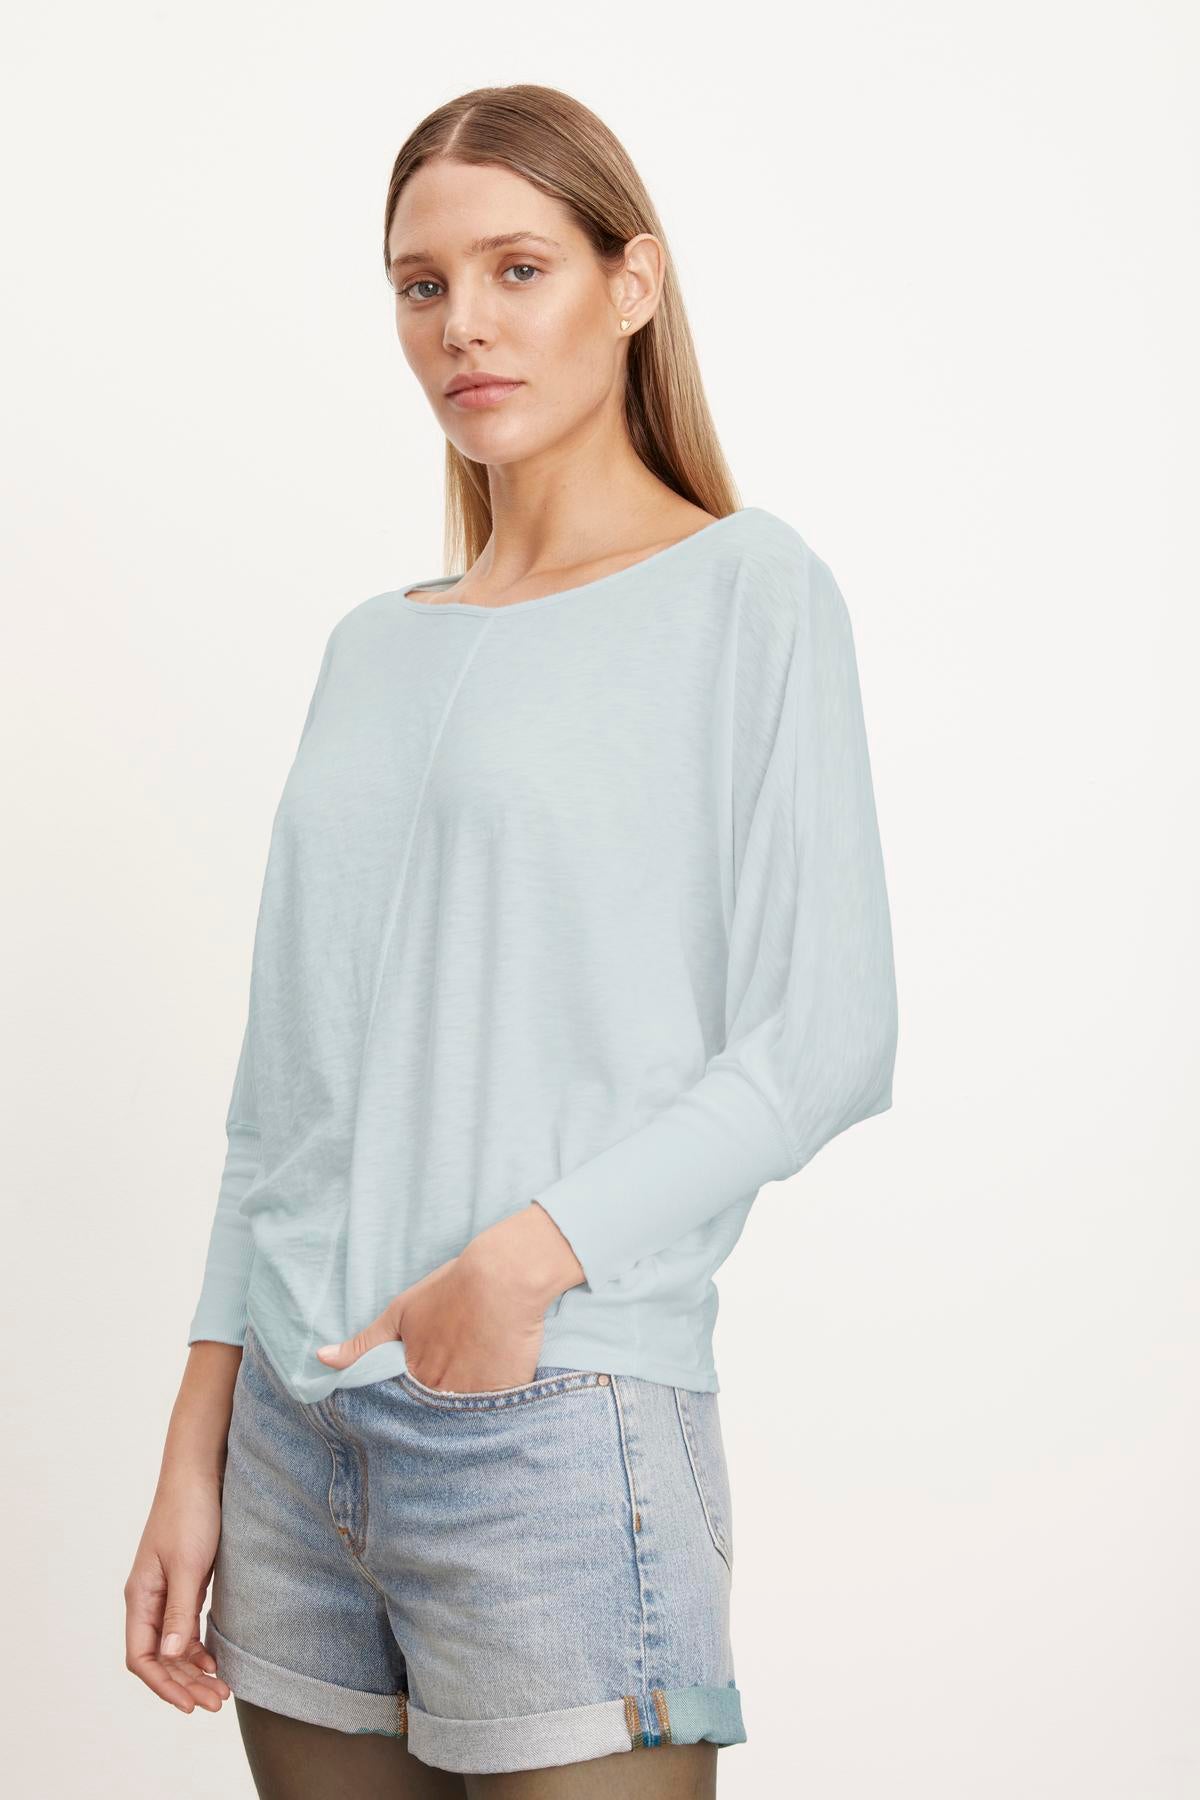 A person with long hair in a slightly cropped, light blue JOSS DOLMAN SLEEVE TEE by Velvet by Graham & Spencer and denim shorts stands against a plain background.-37249861517505